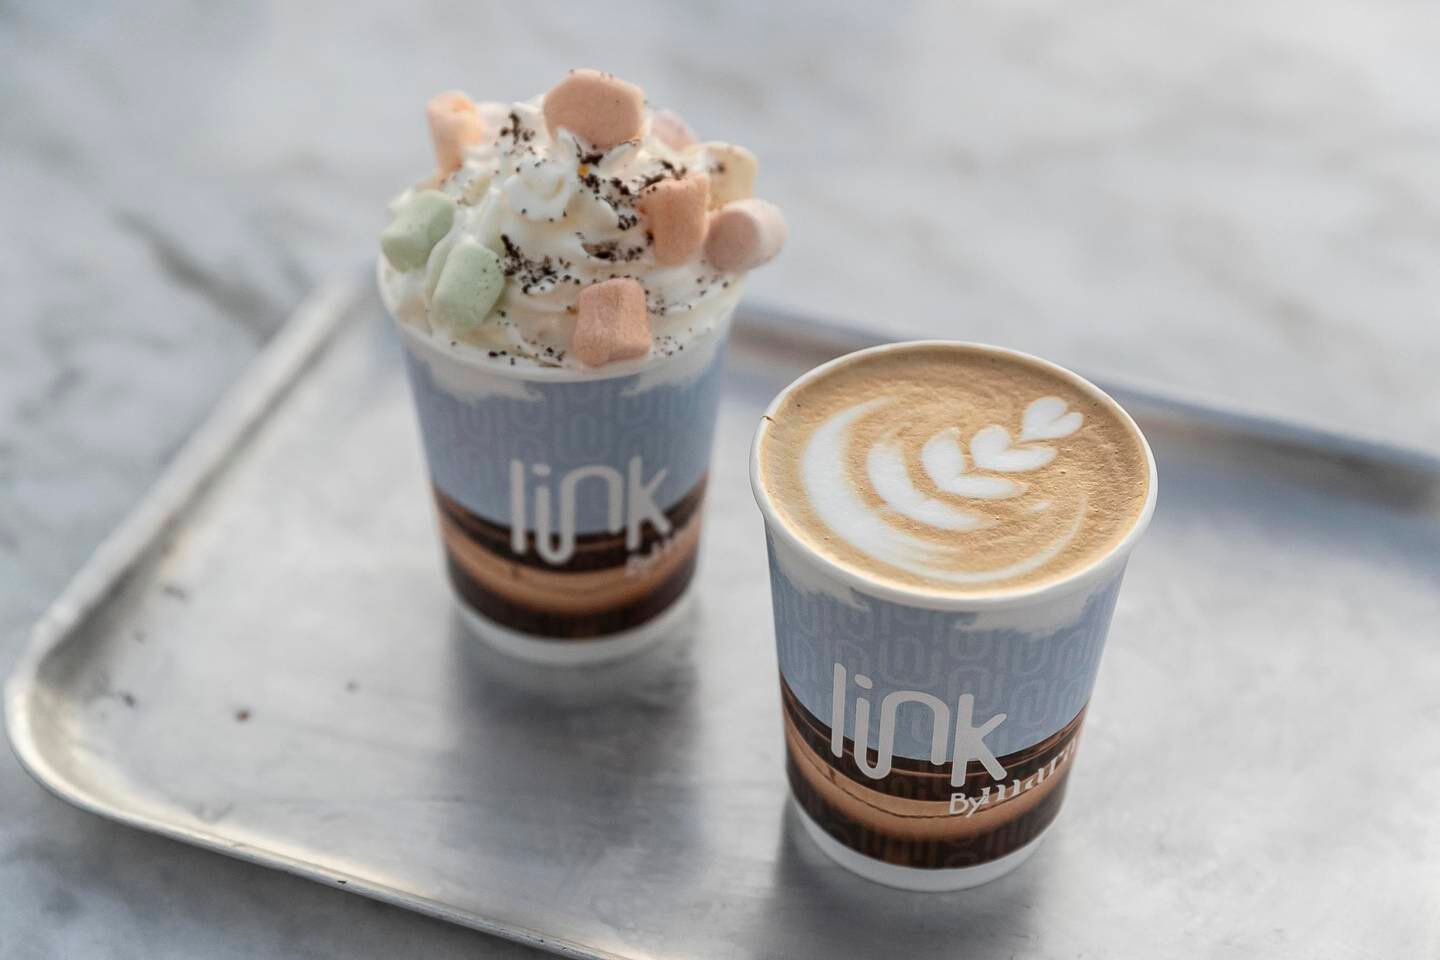 A wide variety of food and beverages are available at Link by mara in Sharjah. Antonie Robertson / The National